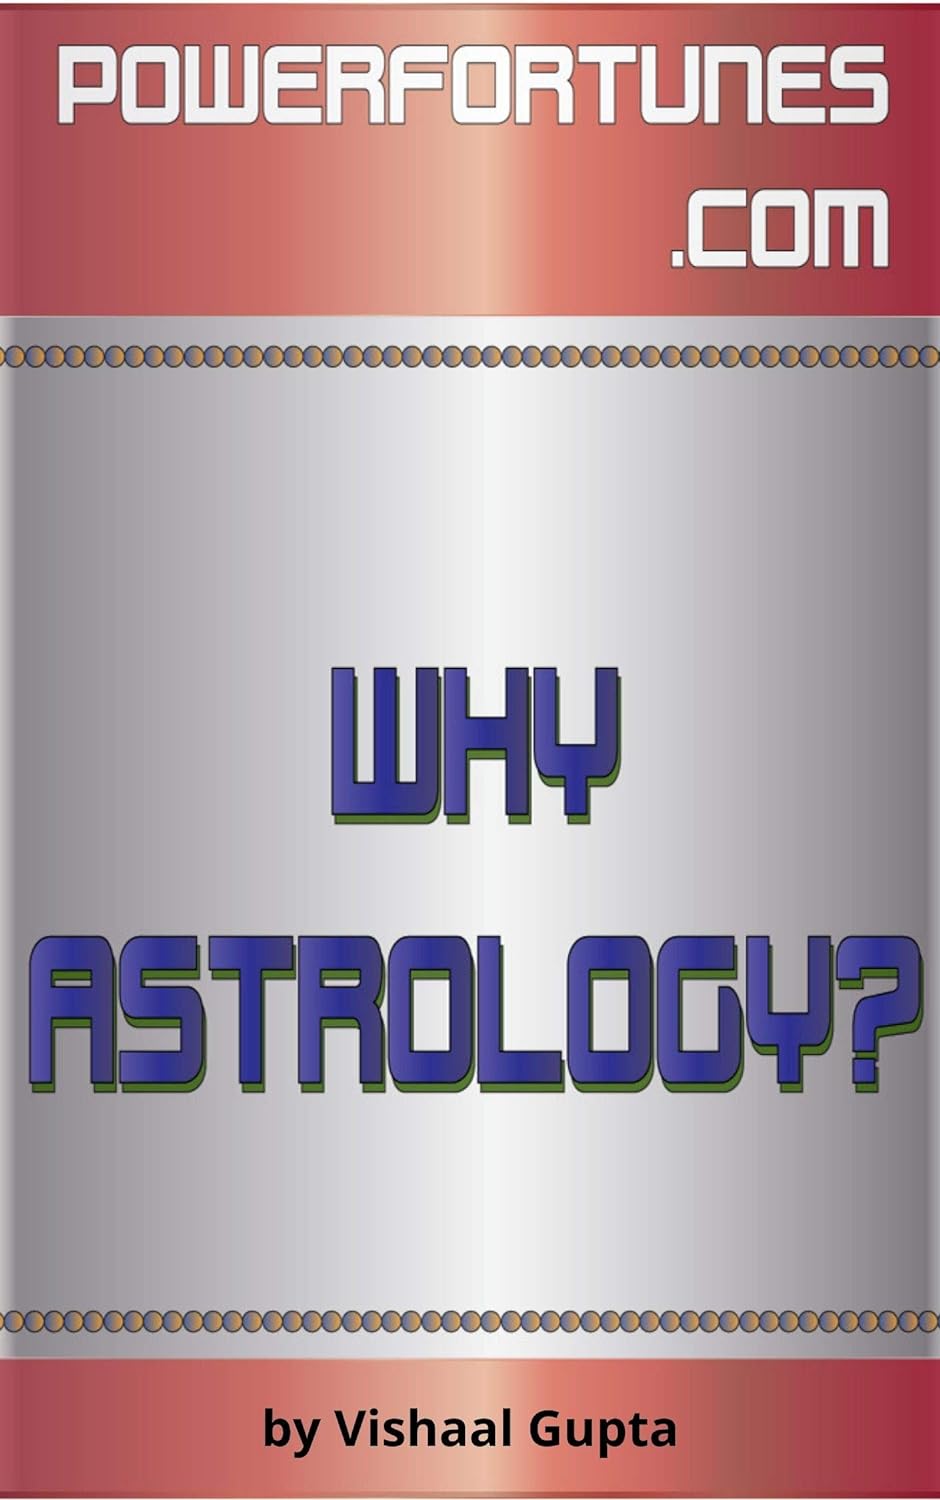 Why Astrology: A Collection of Articles by the Leading Astrology Website, PowerFortunes.com.